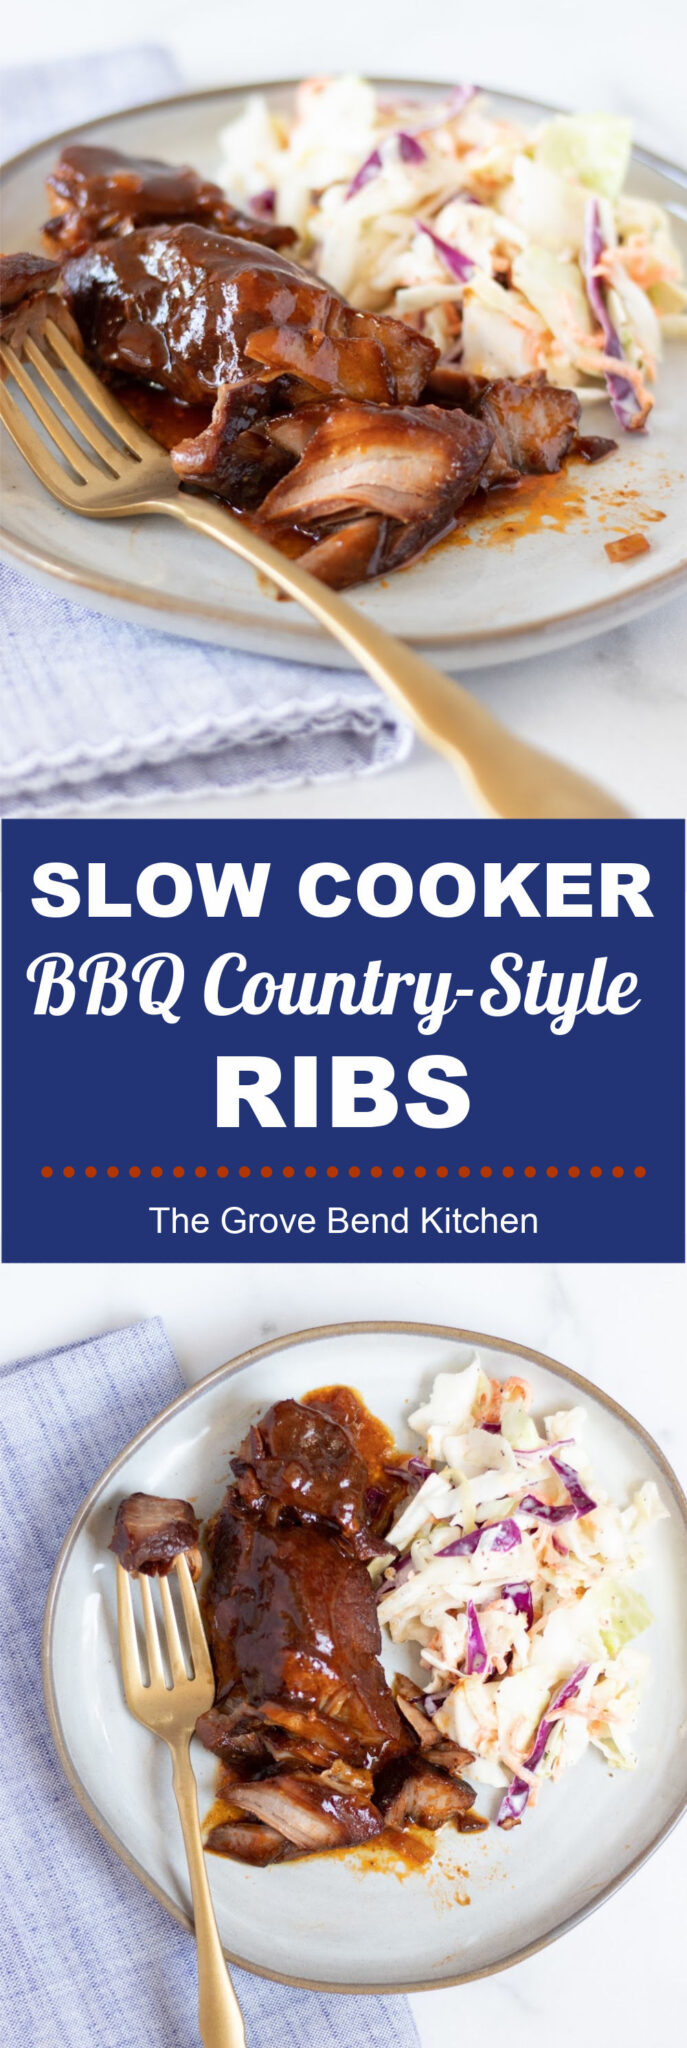 Slow Cooker BBQ Country-Style Ribs - The Grove Bend Kitchen